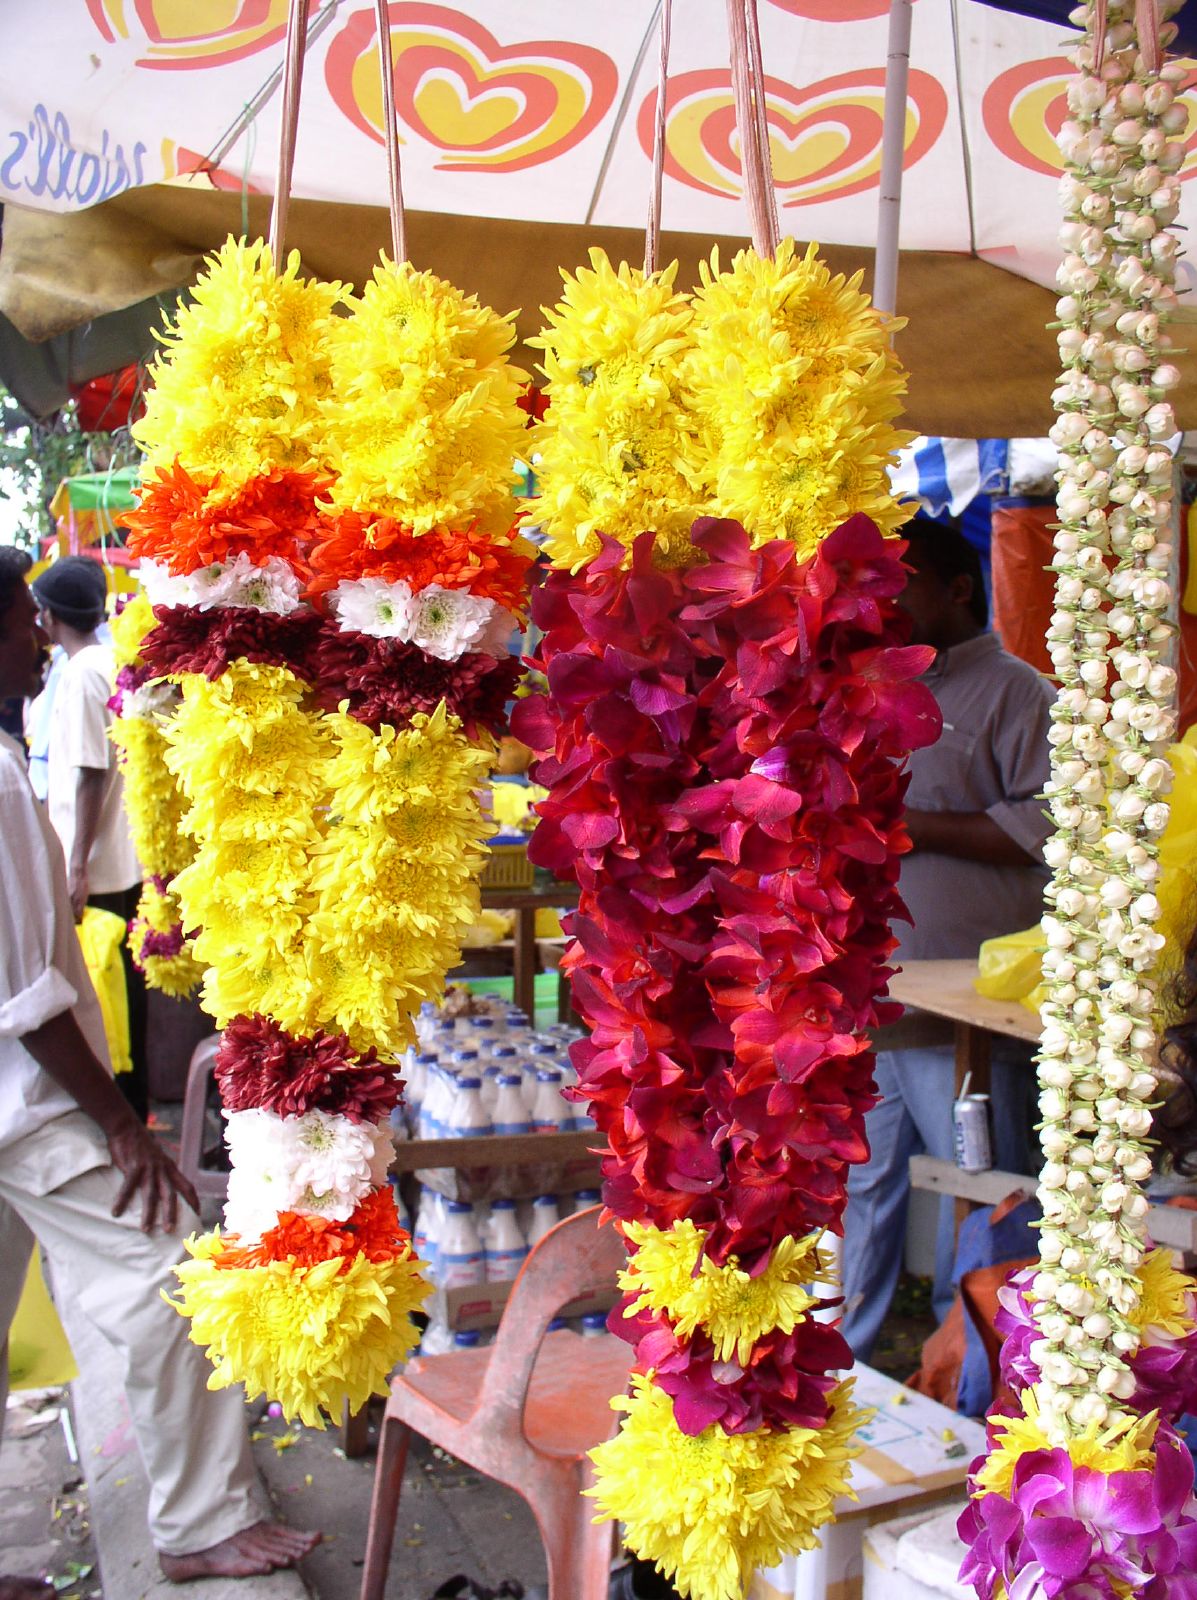 a man is standing near some large paper flowers